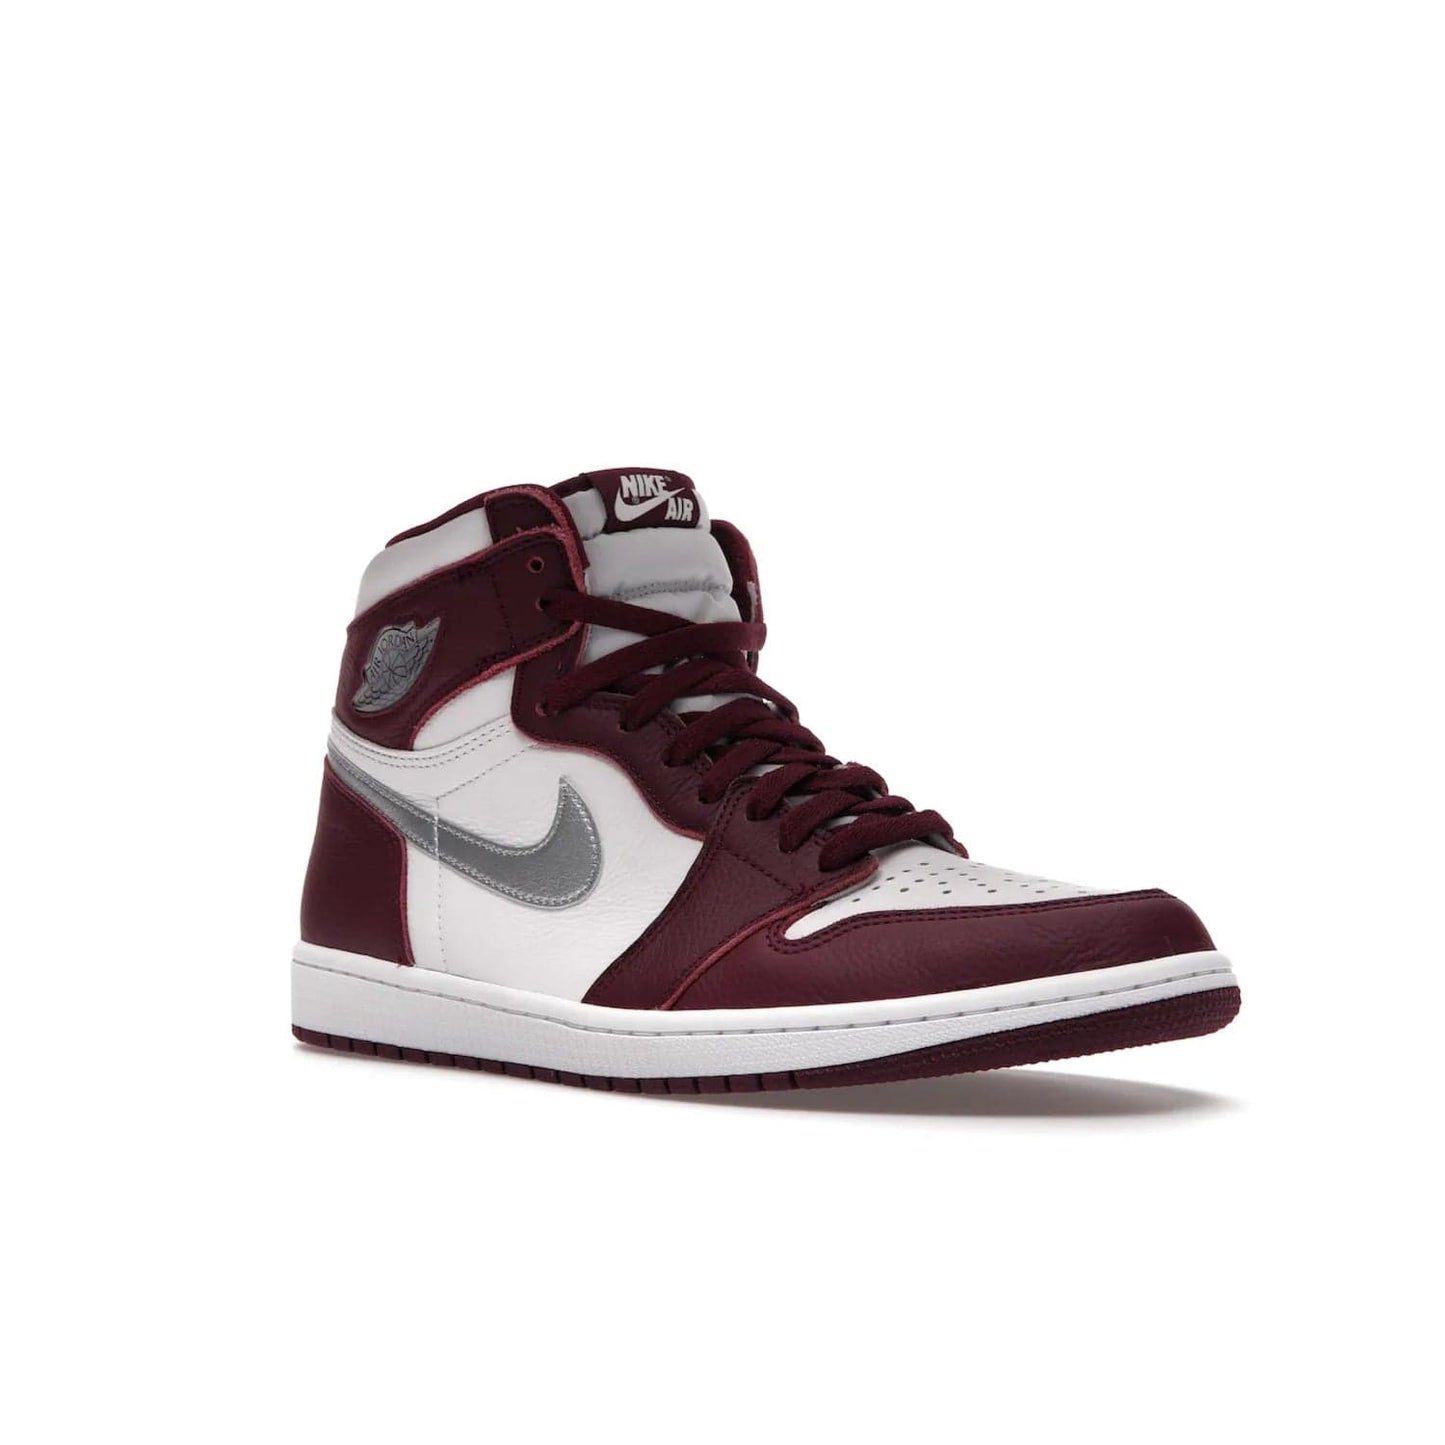 Jordan 1 Retro High OG Bordeaux - Image 5 - Only at www.BallersClubKickz.com - Shop the classic Air Jordan 1 High Bordeaux with a modern high-top cut. The timeless Bordeaux and White-Metallic Silver colorway, releasing Nov 20, 2021, is perfect for practice or a night out.